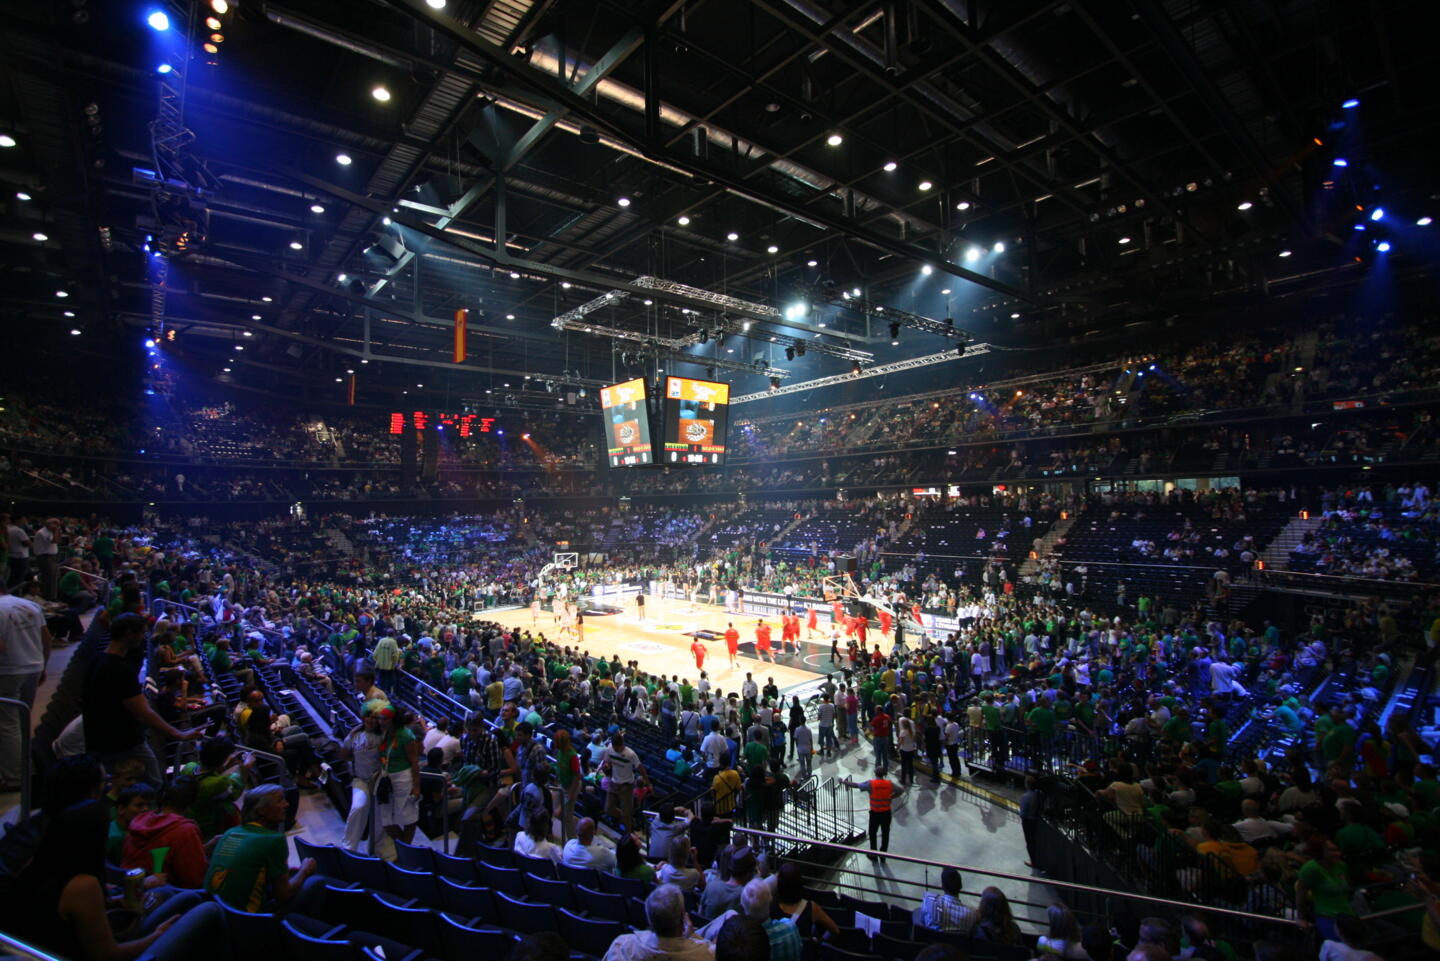 Interior view of a packed sports arena at a basketball event, with spectators in green outfits and the action in the centre on the floodlit floor.